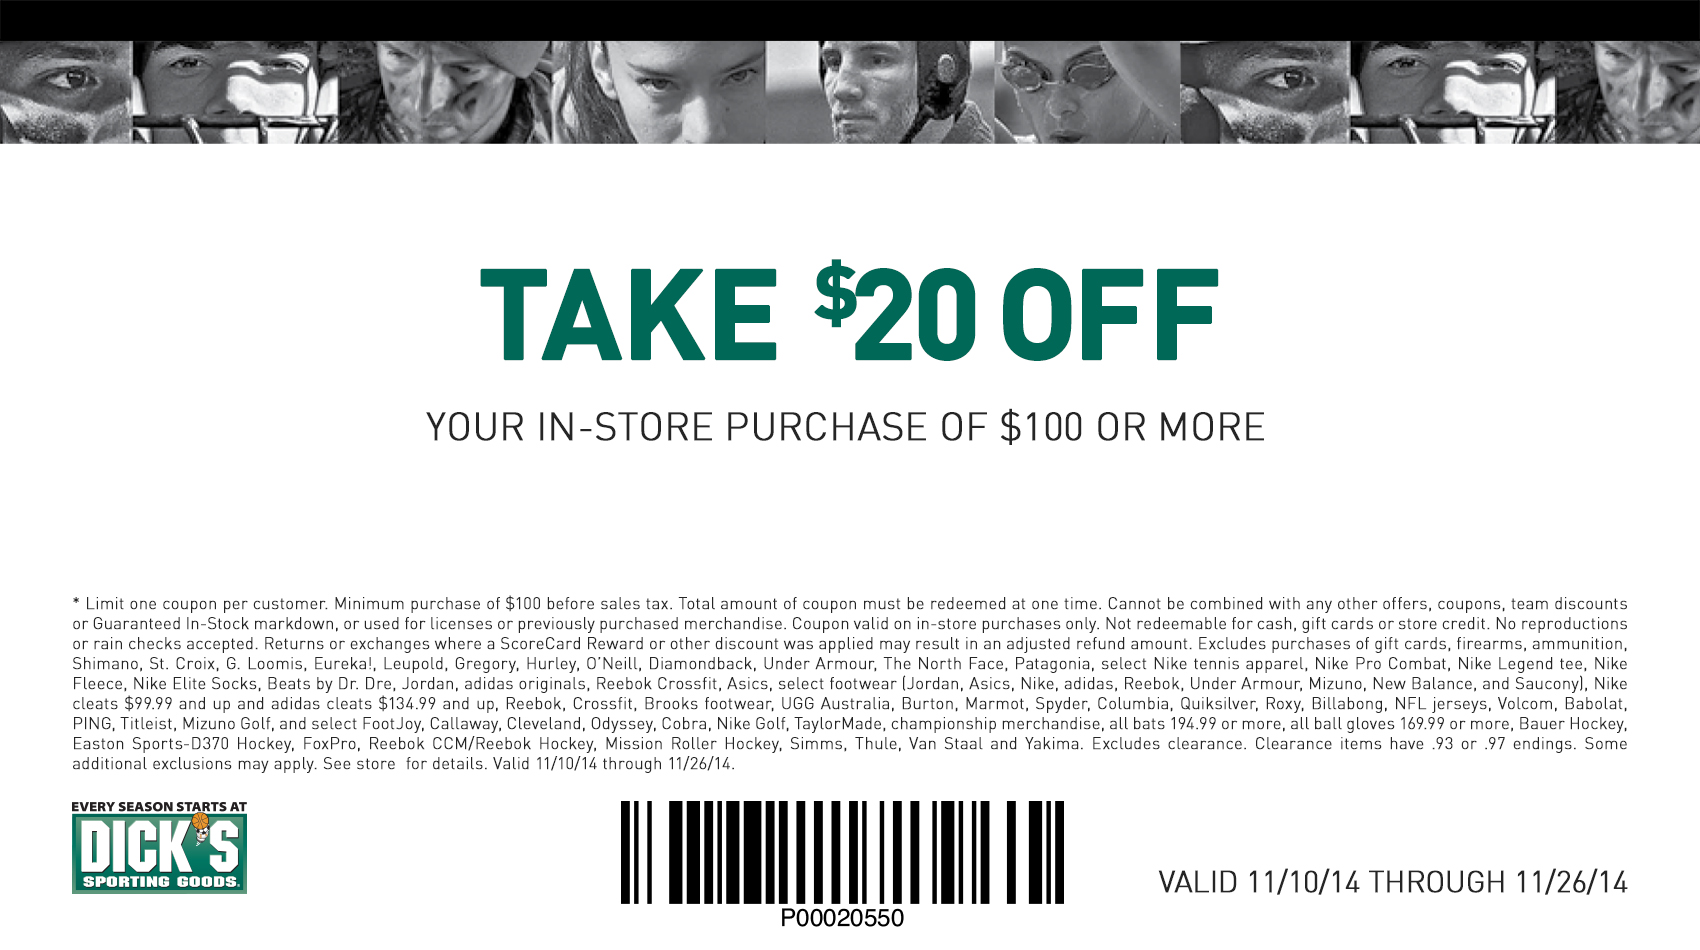 Skip The Black Friday Rush 
					* Limit one coupon per customer. Minimum purchase of $100 before sales tax. Total amount of coupon must be redeemed at one time. Cannot be combined with any 
					other offers, coupons, team discounts or Guaranteed In-Stock markdown, or used for licenses or previously purchased merchandise. Coupon valid on 
					in-store purchases only. Not redeemable for cash, gift cards or store credit. No reproductions or rain checks accepted. Returns or exchanges where 
					a ScoreCard Reward or other discount was applied may result in an adjusted refund amount. Excludes purchases of gift cards, firearms, ammunition, 
					Shimano, St. Croix, G. Loomis, Eureka!, Leupold, Gregory, Hurley, O’Neill, Diamondback, Under Armour, The North Face, Patagonia, select Nike tennis 
					apparel, Nike Pro Combat, Nike Legend tee, Nike Fleece, Nike Elite Socks, Beats by Dr. Dre, Jordan, adidas originals, Reebok Crossfit, Asics, select 
					footwear (Jordan, Asics, Nike, adidas, Reebok, Under Armour, Mizuno, New Balance, and Saucony), Nike cleats $99.99 and up and adidas cleats $134.99 
					and up, Reebok, Crossfit, Brooks footwear, UGG Australia, Burton, Marmot, Spyder, Columbia, Quiksilver, Roxy, Billabong, NFL jerseys, Volcom, Babolat, 
					PING, Titleist, Mizuno Golf, and select FootJoy, Callaway, Cleveland, Odyssey, Cobra, Nike Golf, TaylorMade, championship merchandise, all bats 194.99 or more, 
					all ball gloves 169.99 or more, Bauer Hockey, Easton Sports-D370 Hockey, FoxPro, Reebok CCM/Reebok Hockey, Mission Roller Hockey, Simms, Thule, Van 
					Staal and Yakima. Excludes clearance. Clearance items have .93 or .97 endings. Some additional exclusions may apply. See store  for details. Valid 
					11/10/14 through 11/26/14.